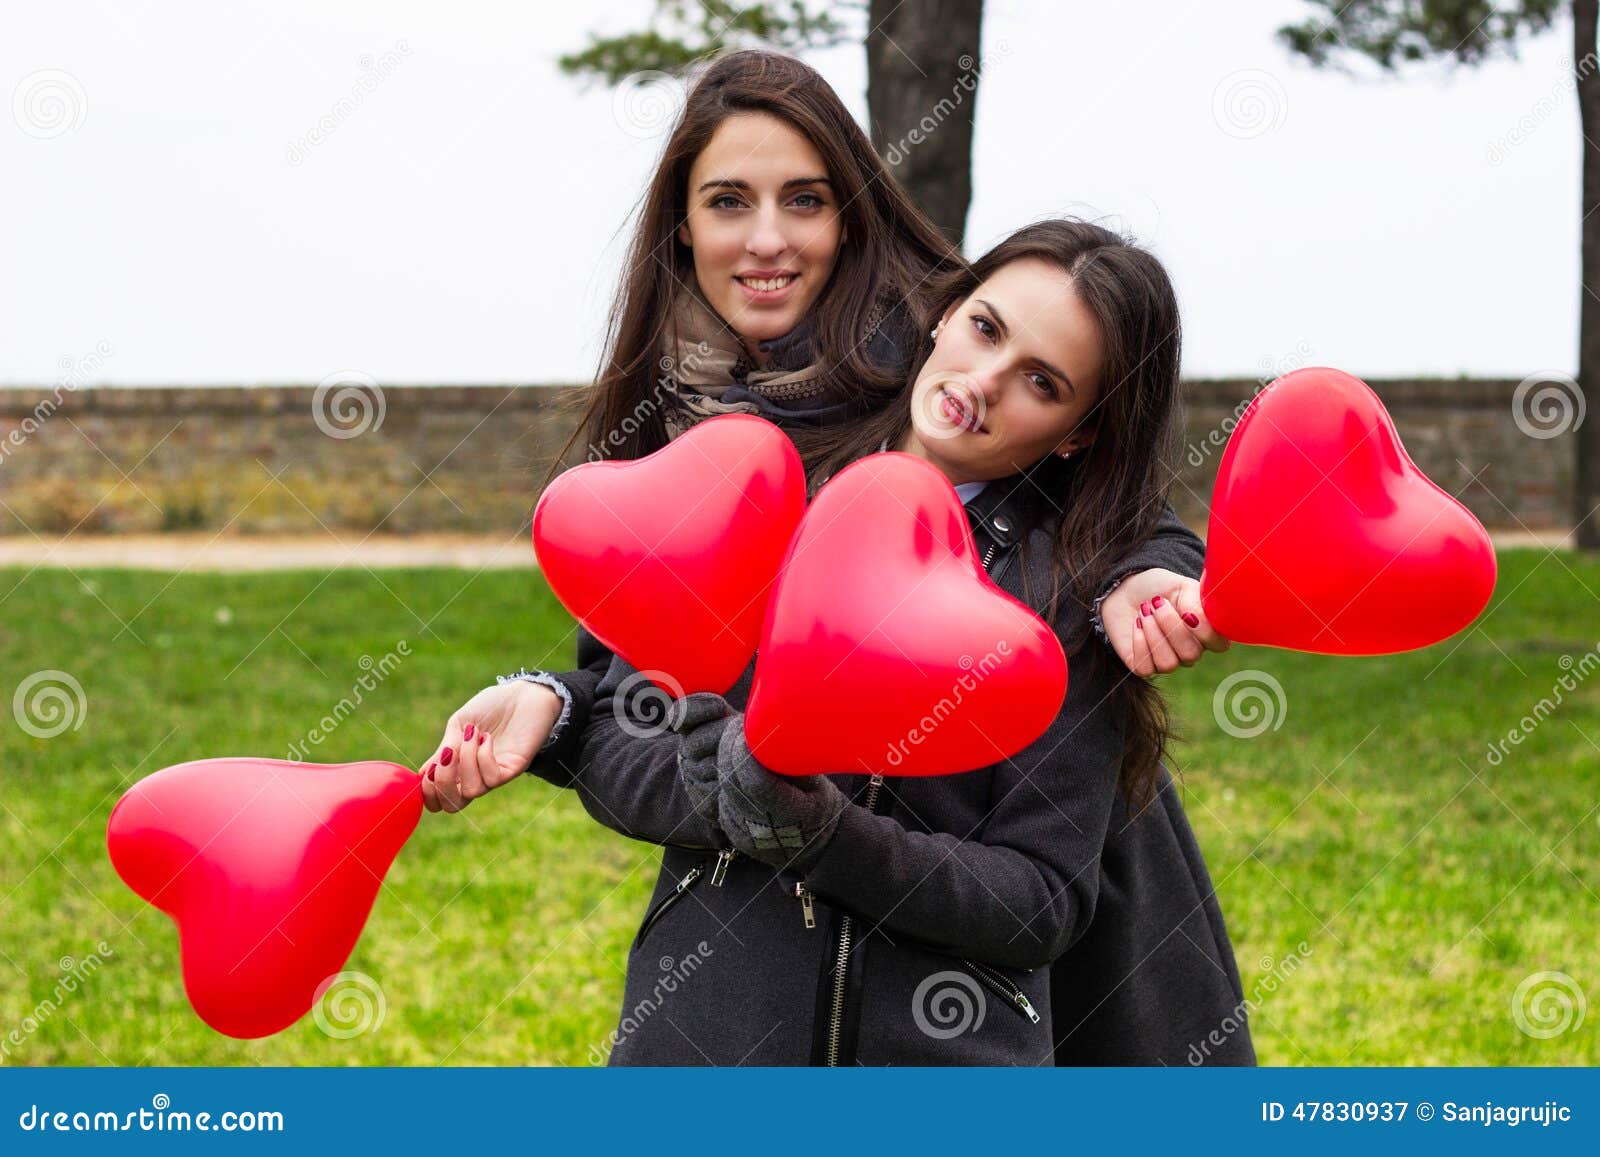 Two smiling girls holding hearts, portrait